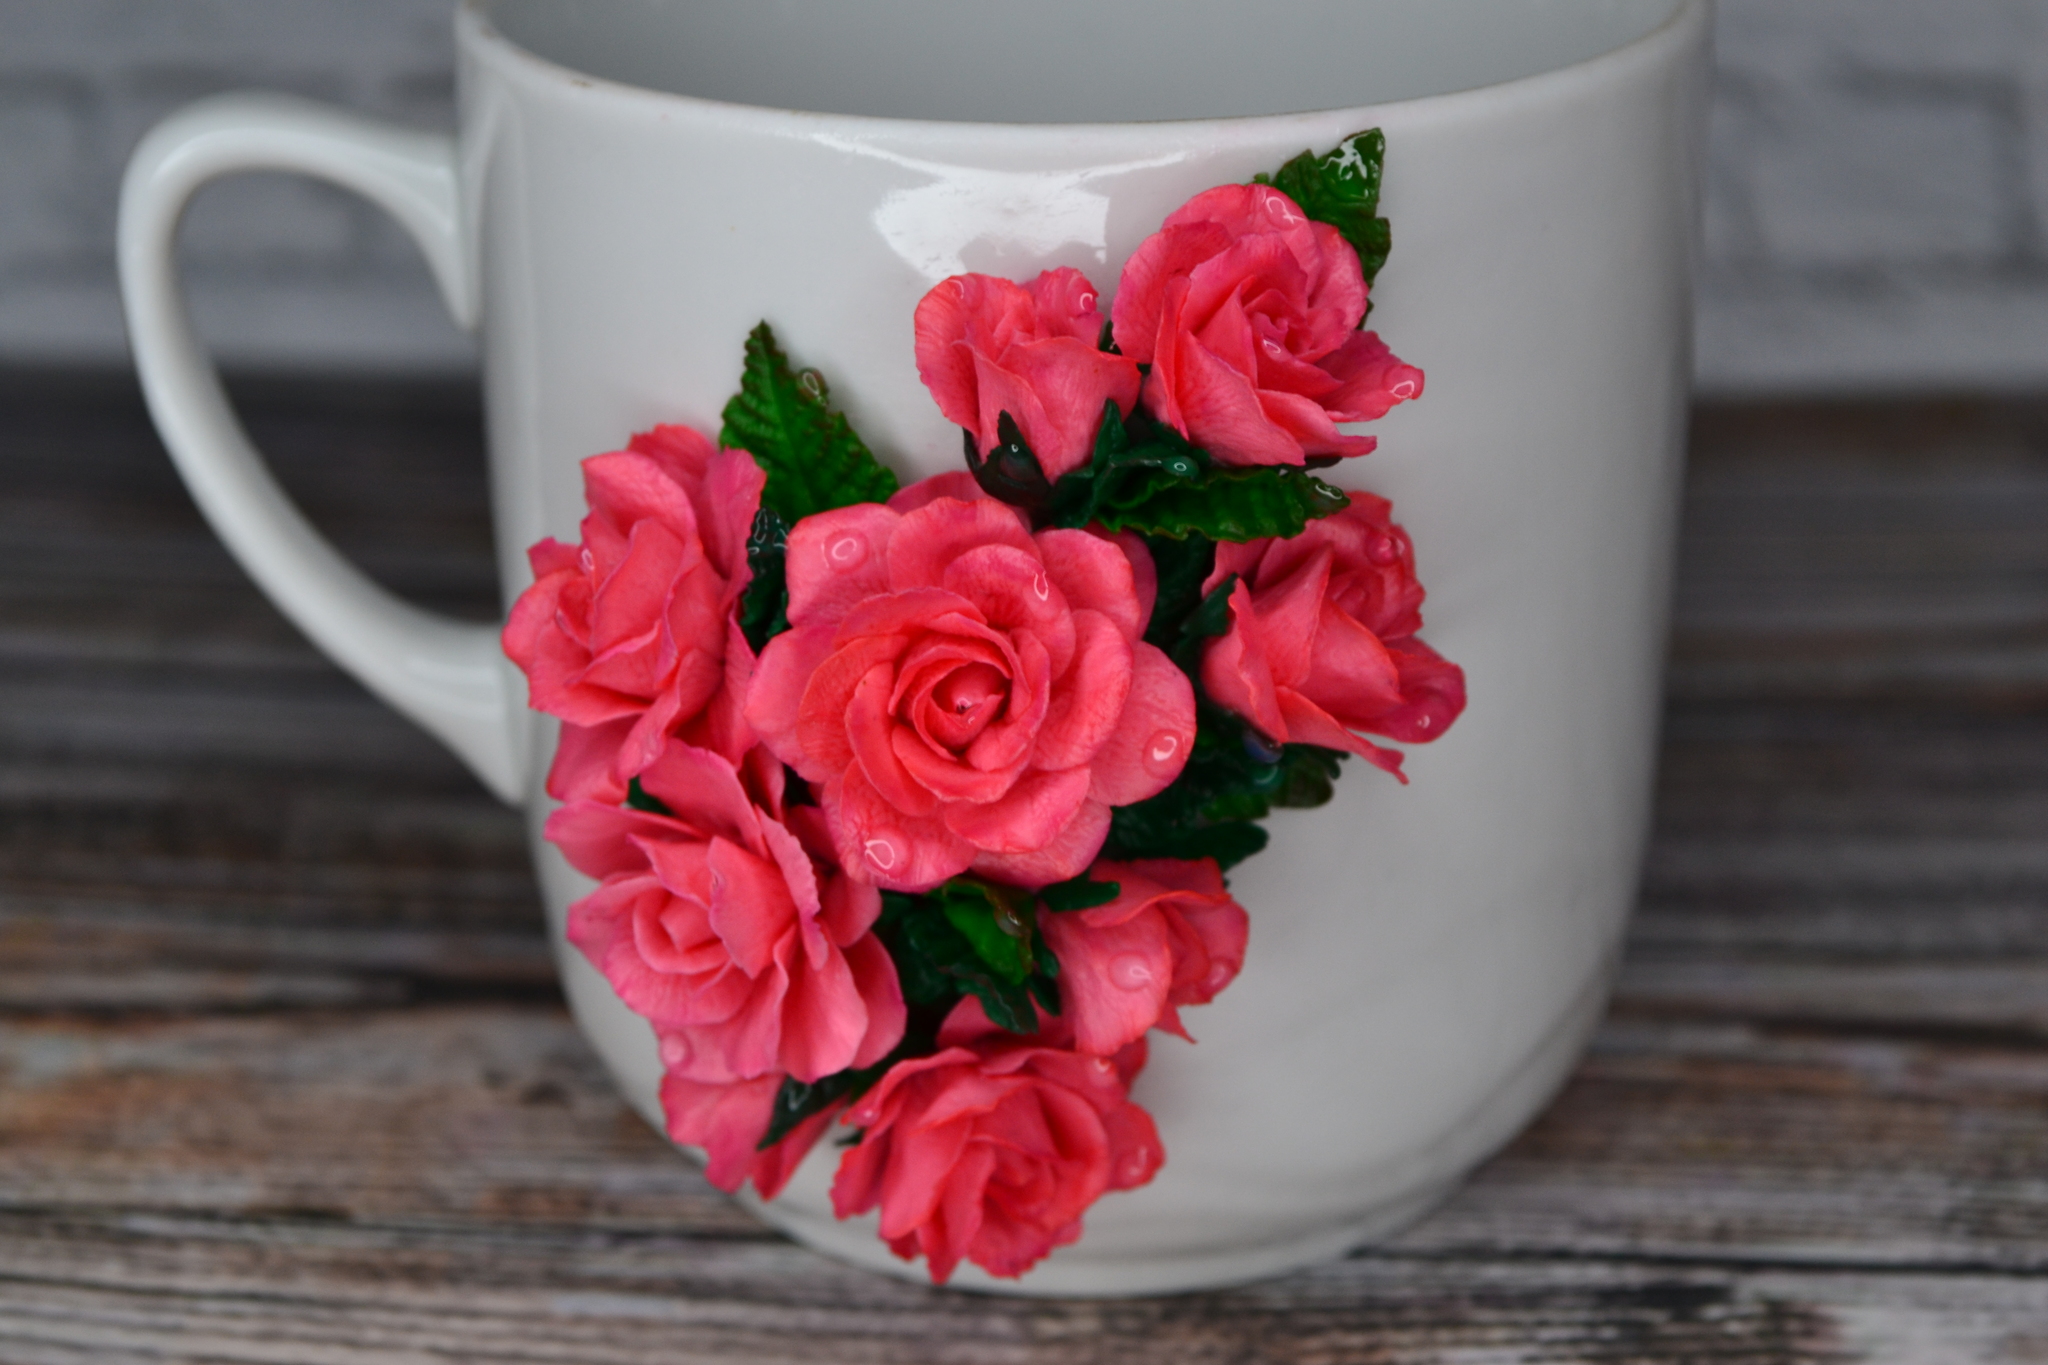 To the Rose Lover - My, the Rose, Needlework without process, Handmade, With your own hands, Bouquet, Flower bed, Flowers, Holidays, Presents, Mug with decor, Кружки